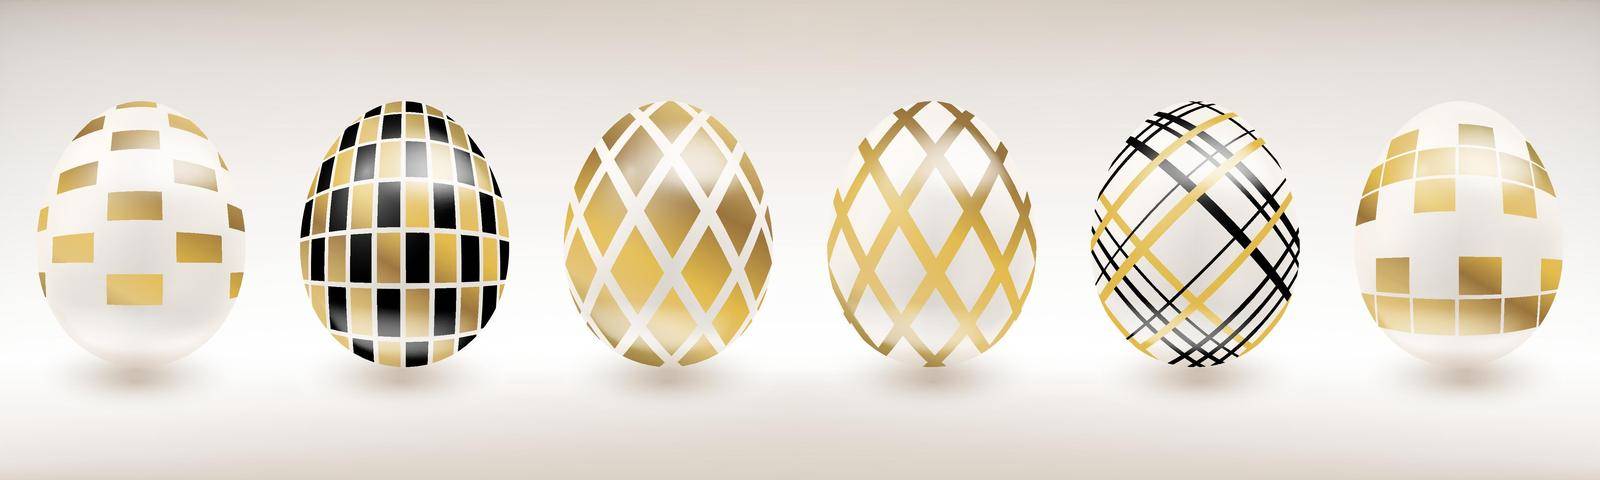 White porcelain Easter egg with gold and black geometric decor